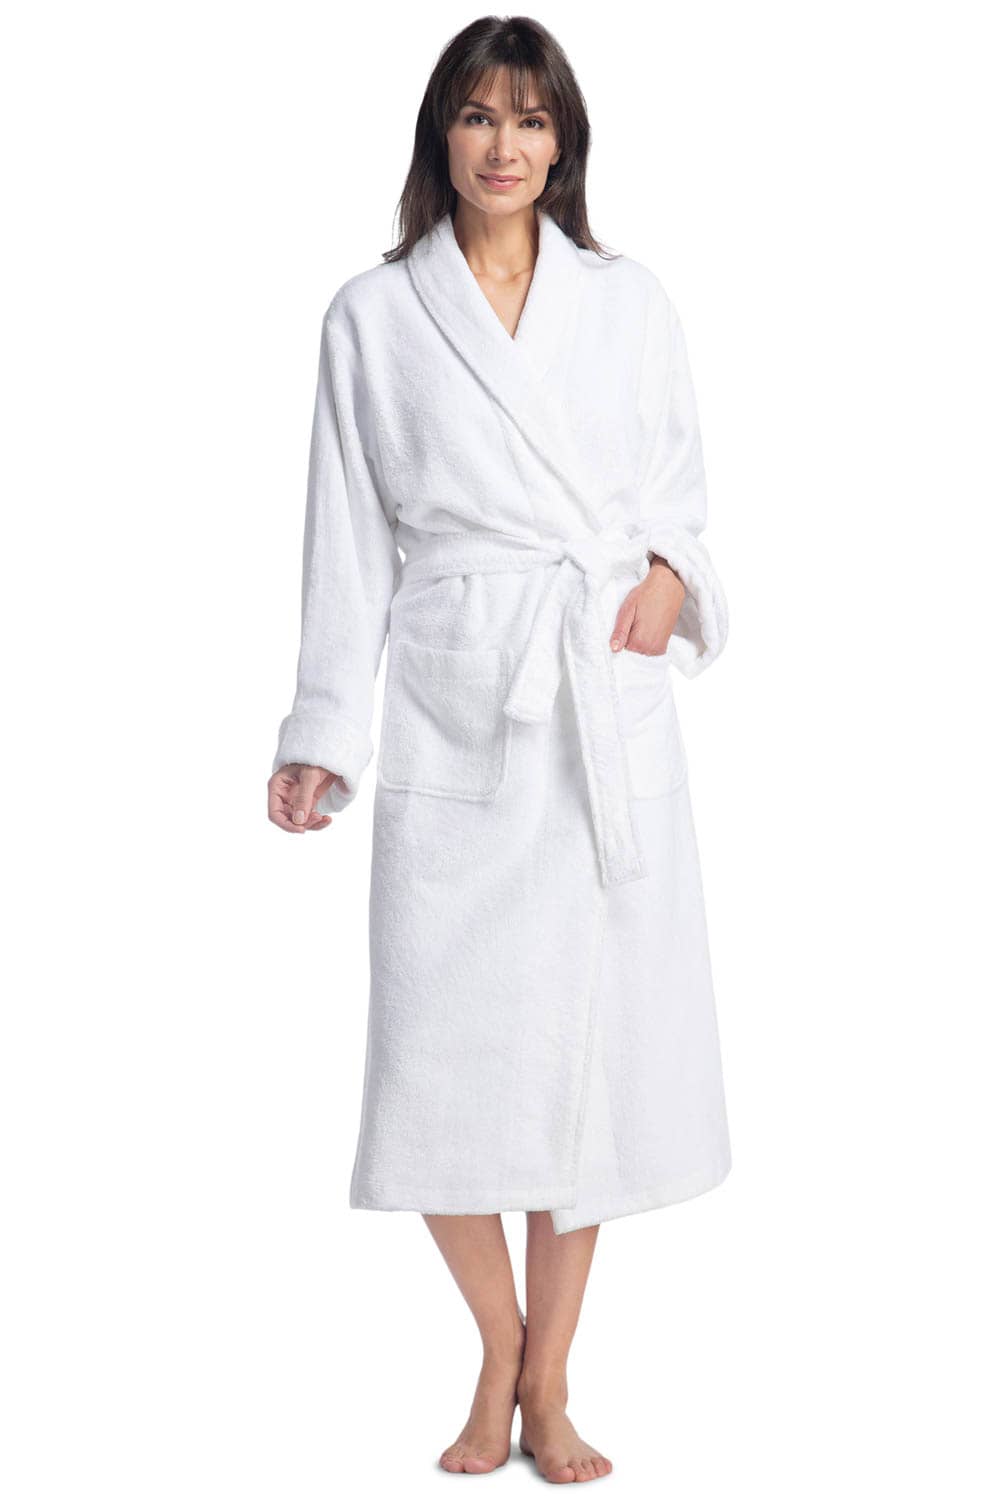 Women's Robes |Terry Cloth Robe, Full Length Spa Robe | Fishers Finery